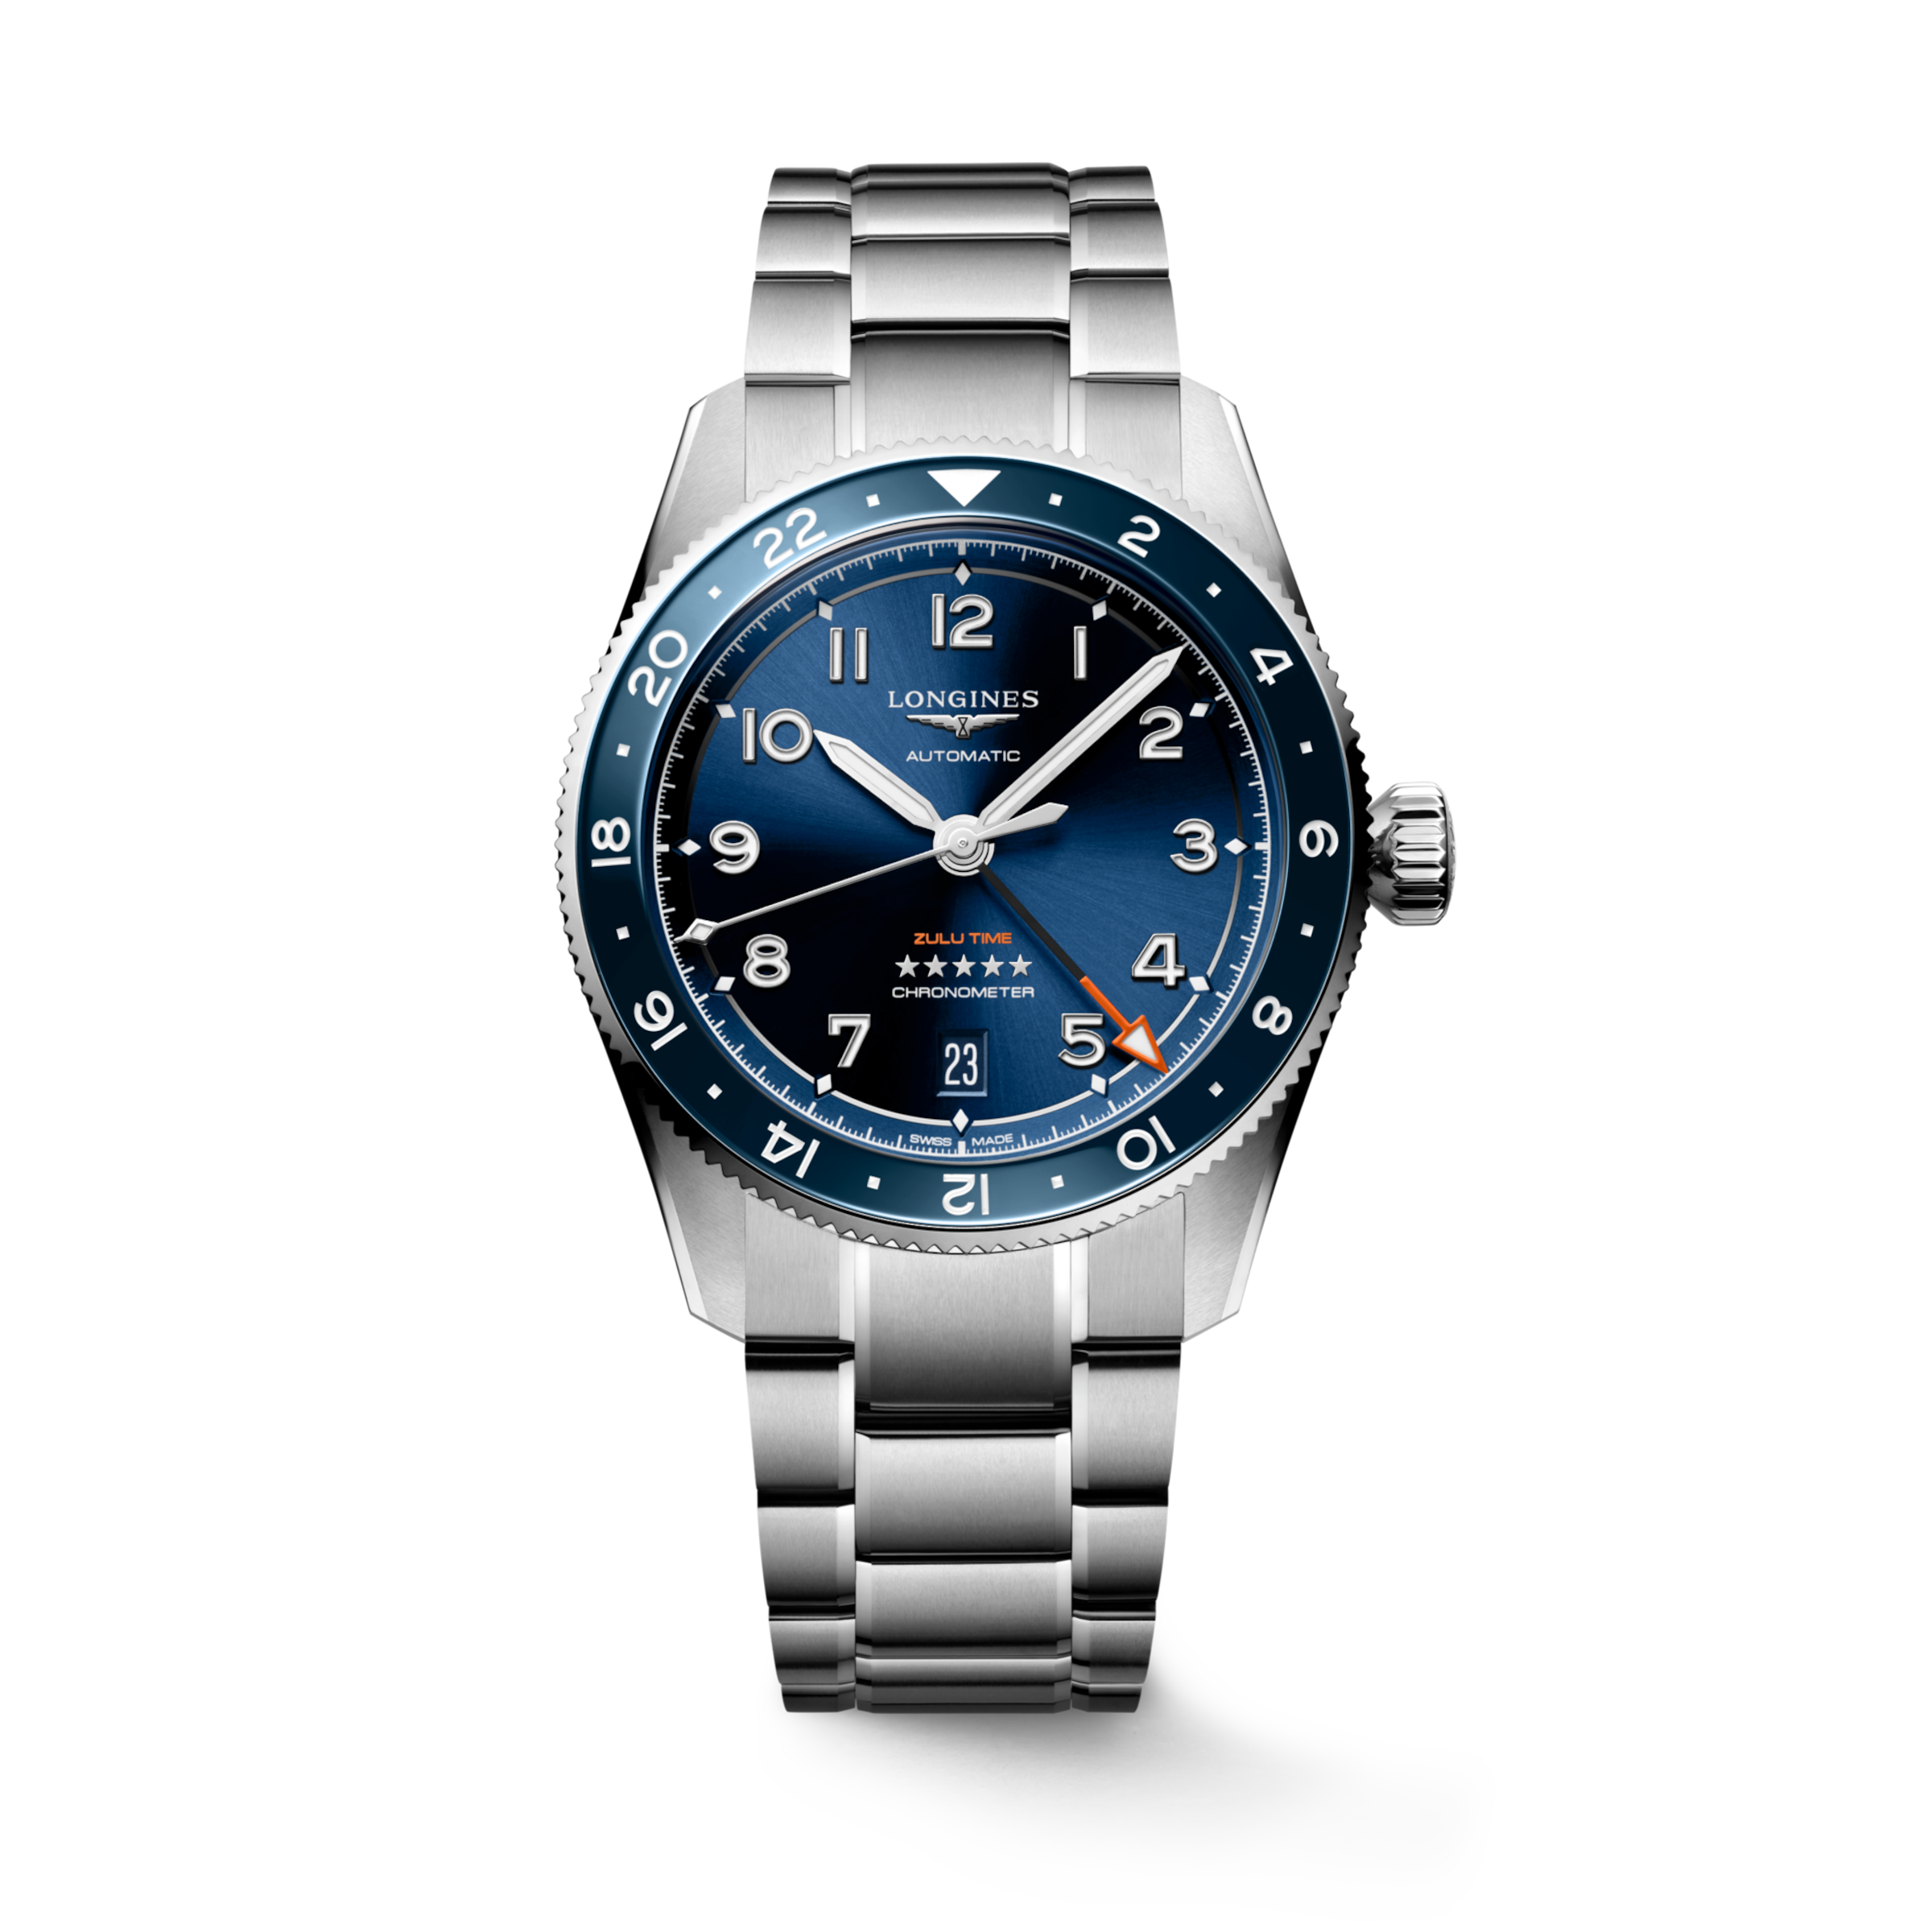 Longines SPIRIT Automatic Stainless steel and ceramic bezel Watch - L3.802.4.93.6